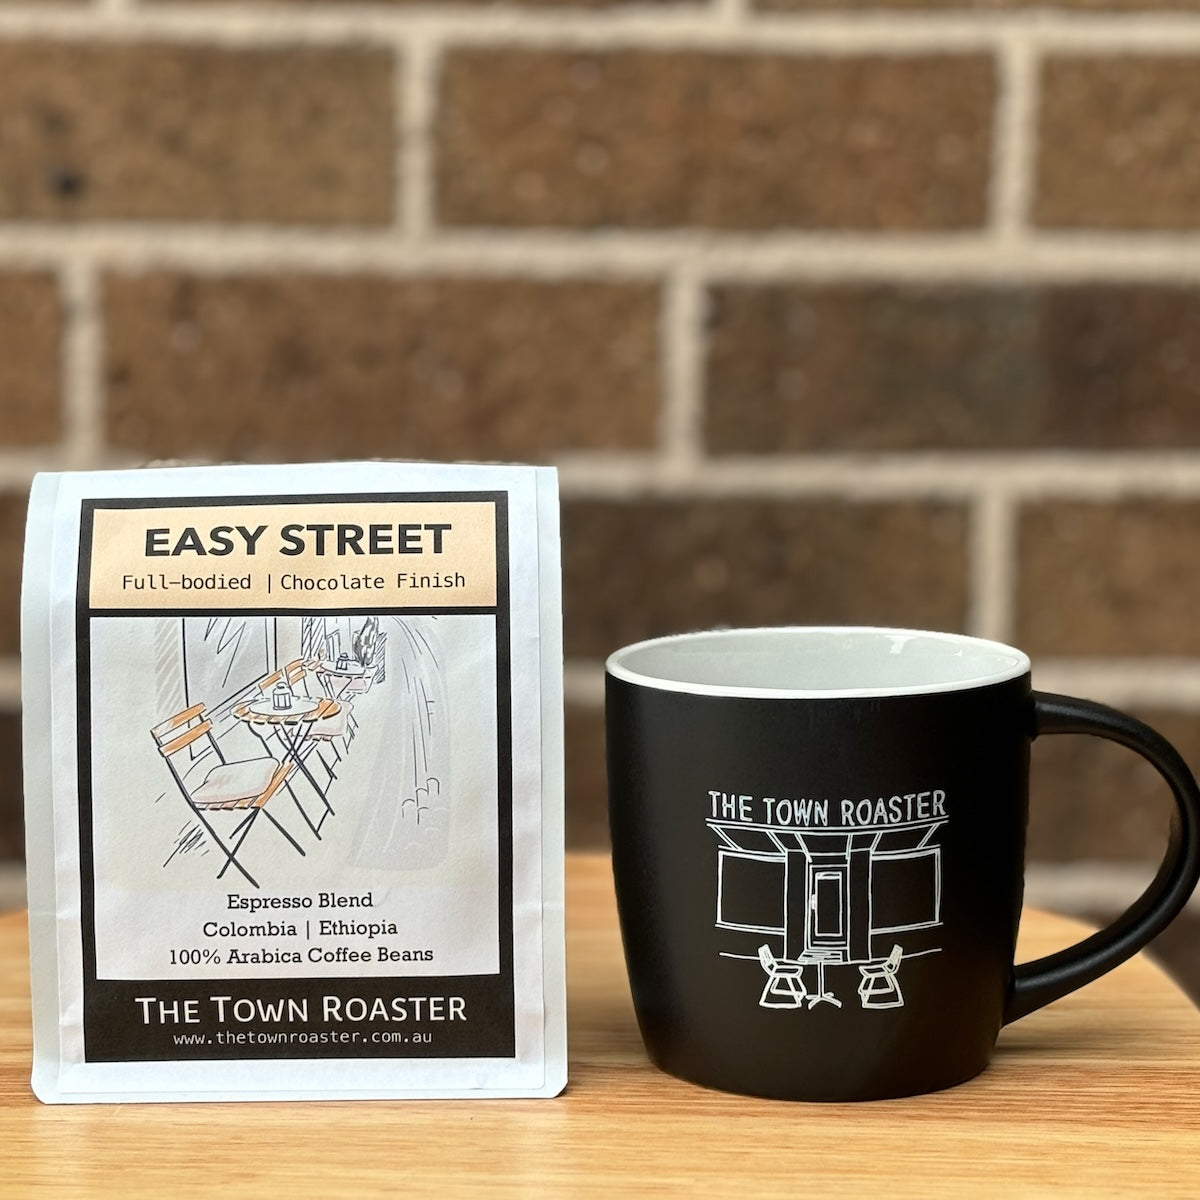 Coffee Gift Box with Mug and Easy Street Coffee from The Town Roaster